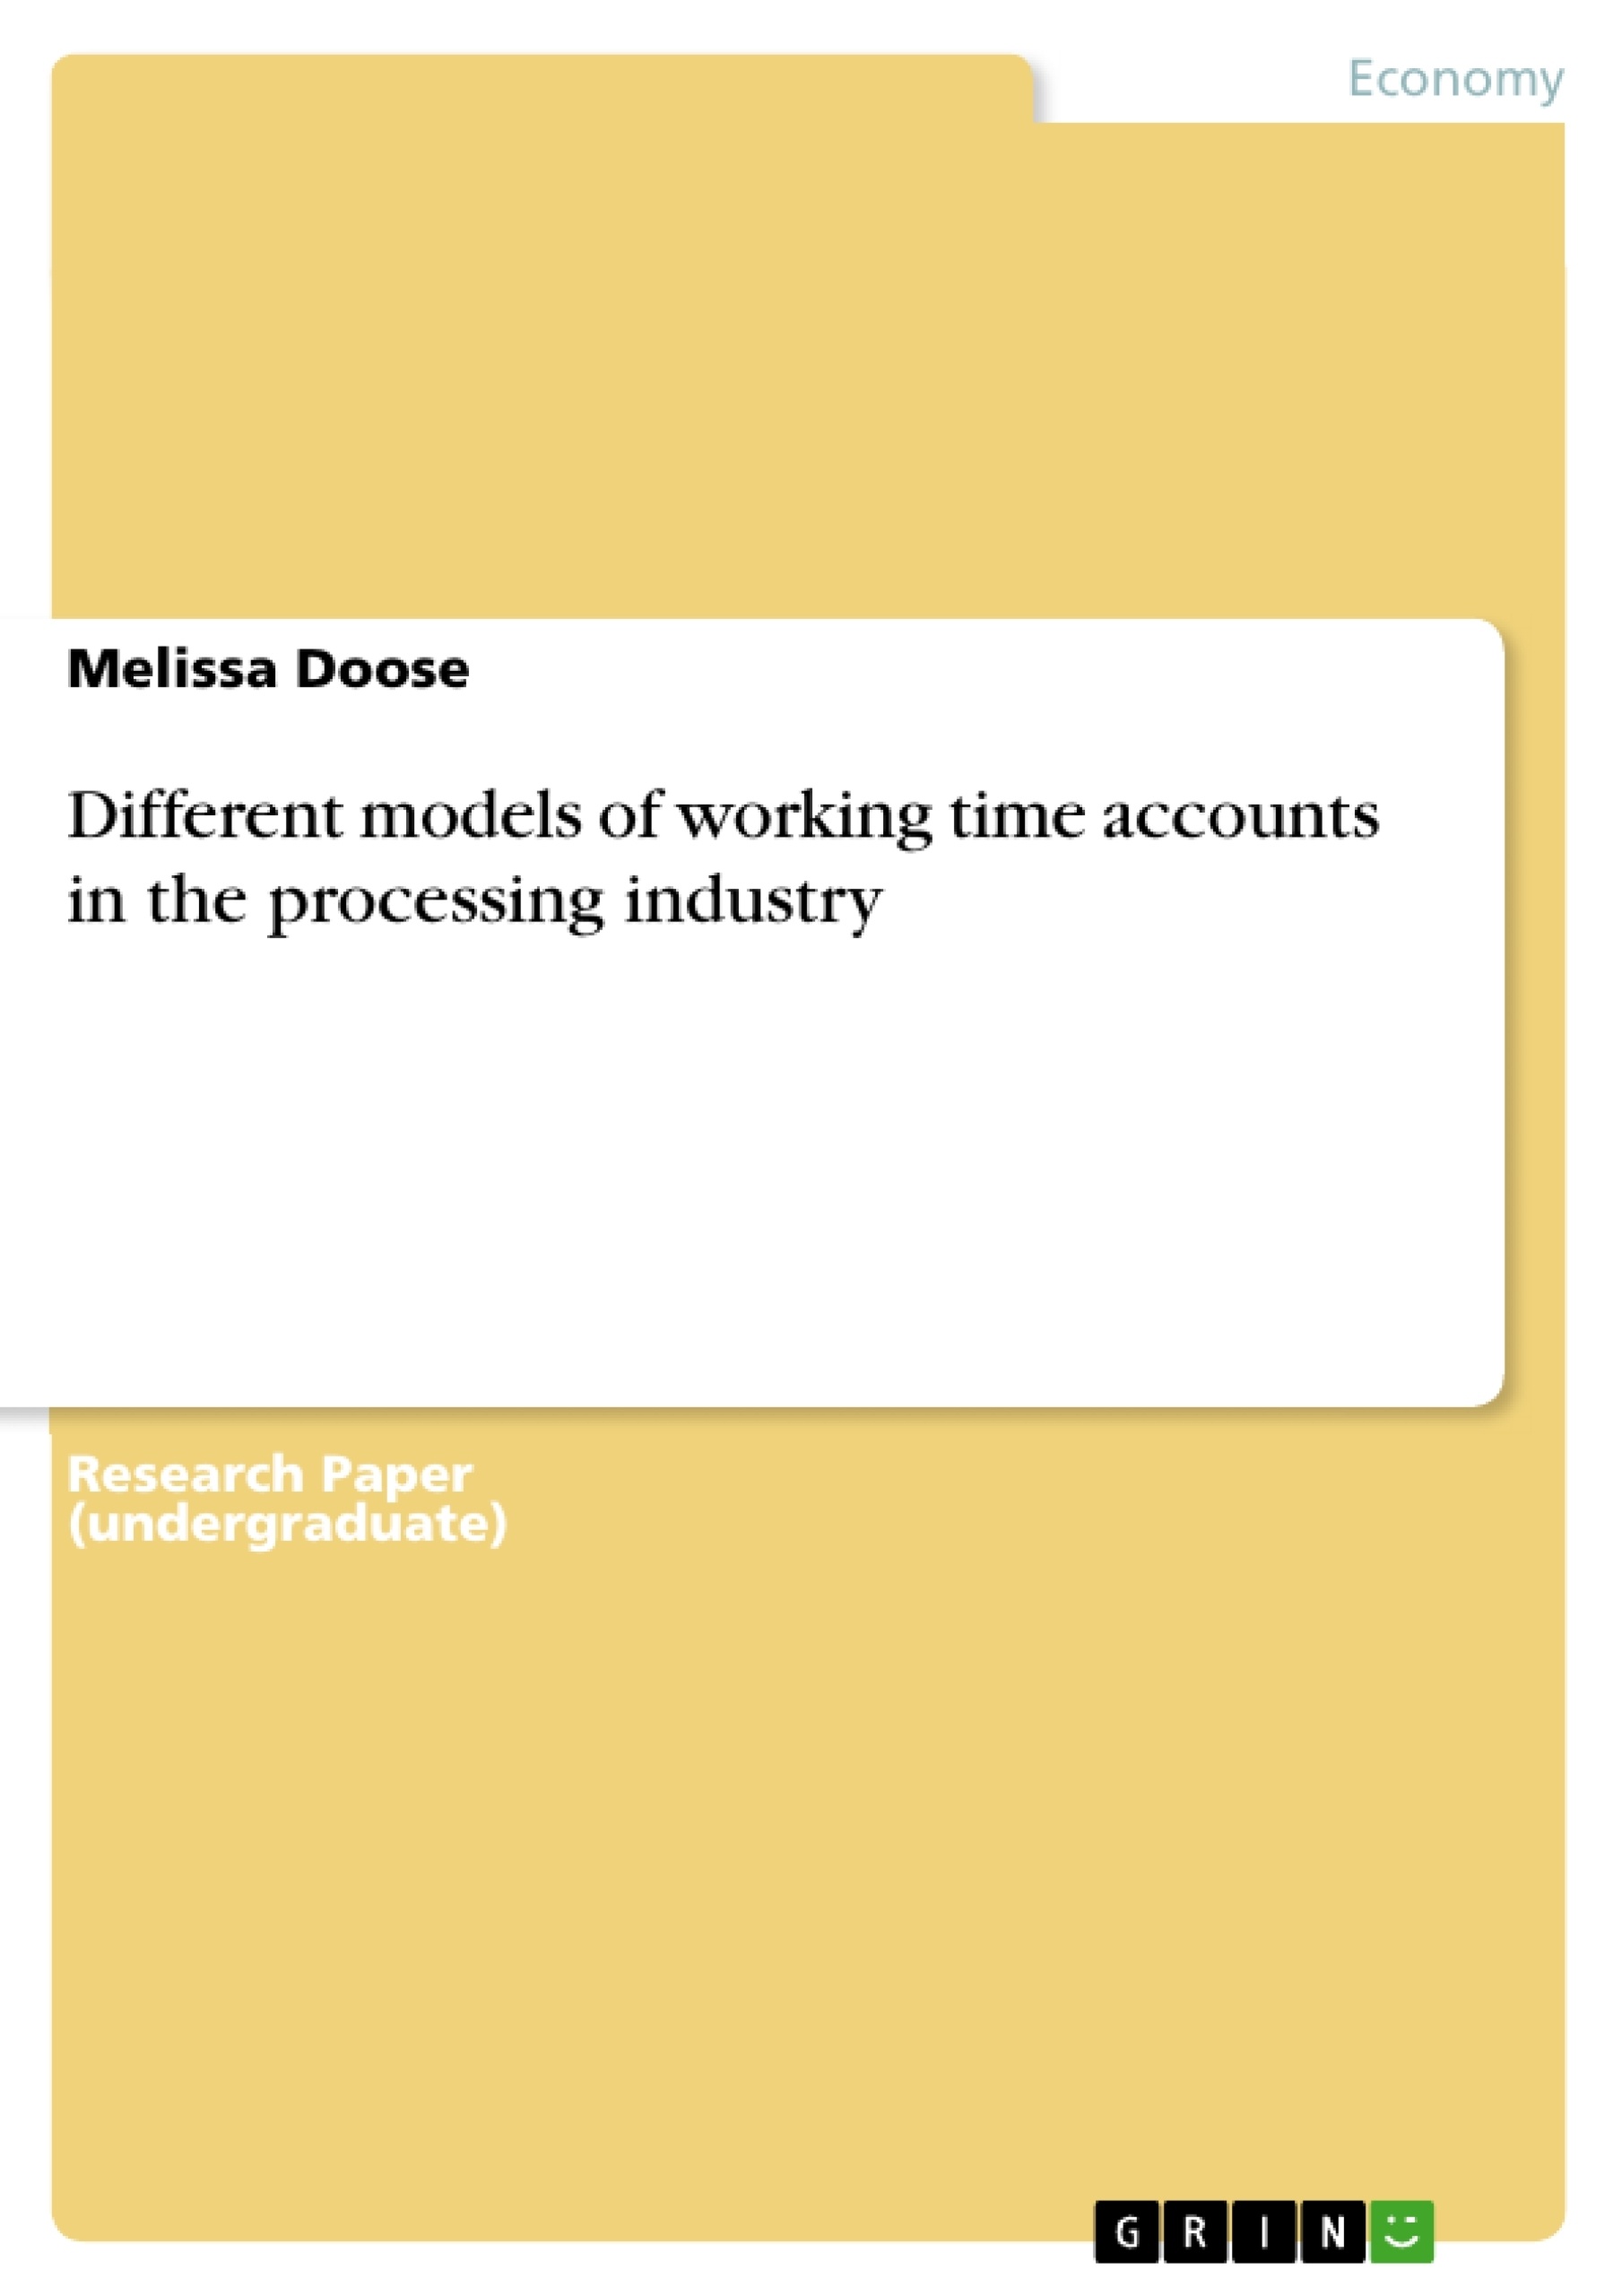 Title: Different models of working time accounts in the processing industry